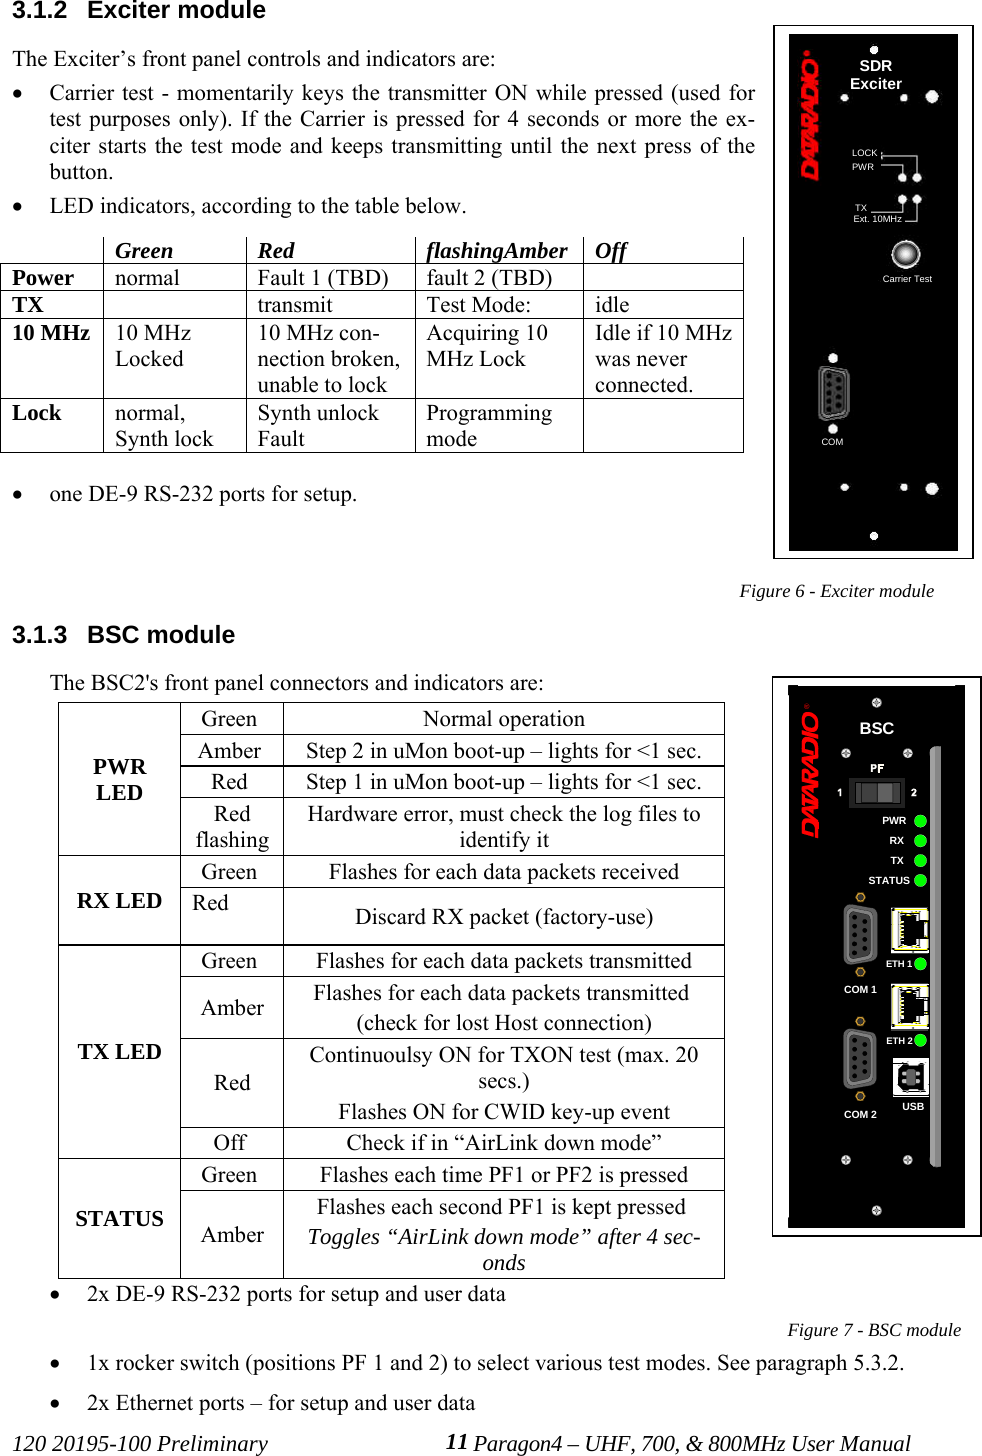 120 20195-100 Preliminary Paragon4 – UHF, 700, &amp; 800MHz User Manual113.1.2  Exciter moduleThe Exciter’s front panel controls and indicators are:• Carrier test - momentarily keys the transmitter ON while pressed (used fortest purposes only). If the Carrier is pressed for 4 seconds or more the ex-citer starts the test mode and keeps transmitting until the next press of thebutton.• LED indicators, according to the table below.• one DE-9 RS-232 ports for setup.  Figure 6 - Exciter module3.1.3  BSC moduleThe BSC2&apos;s front panel connectors and indicators are:Green  Normal operationAmber  Step 2 in uMon boot-up – lights for &lt;1 sec.Red  Step 1 in uMon boot-up – lights for &lt;1 sec.PWRLED RedflashingHardware error, must check the log files toidentify itGreen  Flashes for each data packets receivedRX LED Red          Discard RX packet (factory-use)Green  Flashes for each data packets transmittedAmber Flashes for each data packets transmitted (check for lost Host connection)RedContinuoulsy ON for TXON test (max. 20secs.)Flashes ON for CWID key-up eventTX LEDOff  Check if in “AirLink down mode”Green  Flashes each time PF1 or PF2 is pressedSTATUS AmberFlashes each second PF1 is kept pressed Toggles “AirLink down mode” after 4 sec-onds• 2x DE-9 RS-232 ports for setup and user dataFigure 7 - BSC module• 1x rocker switch (positions PF 1 and 2) to select various test modes. See paragraph 5.3.2. • 2x Ethernet ports – for setup and user dataGreen Red flashingAmber OffPower normal Fault 1 (TBD) fault 2 (TBD)TX transmit Test Mode:   idle10 MHz 10 MHzLocked10 MHz con-nection broken,unable to lockAcquiring 10MHz LockIdle if 10 MHzwas neverconnected.Lock normal,Synth lockSynth unlockFault ProgrammingmodeLOCKPWRTXExt. 10MHzCOMCarrier TestSDRExciter®PWRTXBSCETH 2RXUSBETH 1COM 2COM 1STATUS